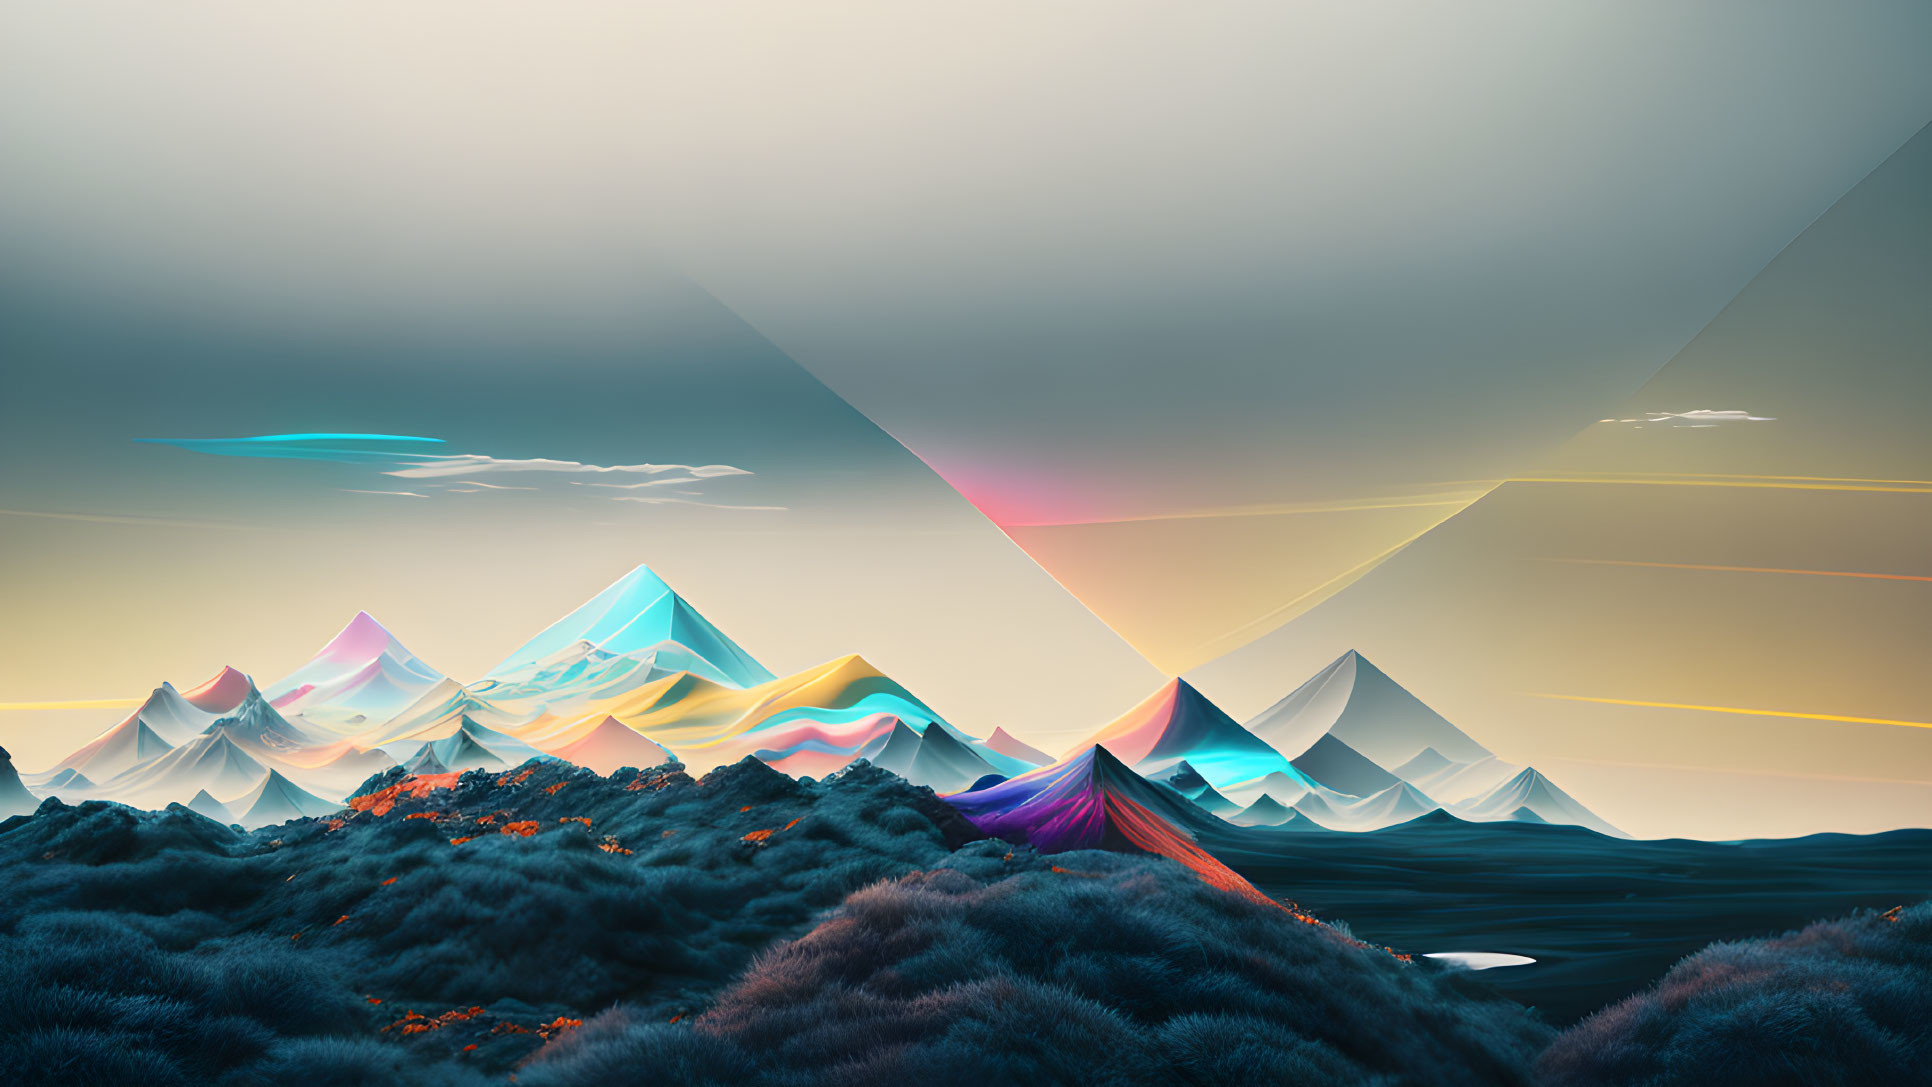 Colorful Stylized Mountains in Surreal Landscape with Geometric Sky and Dark Foliage